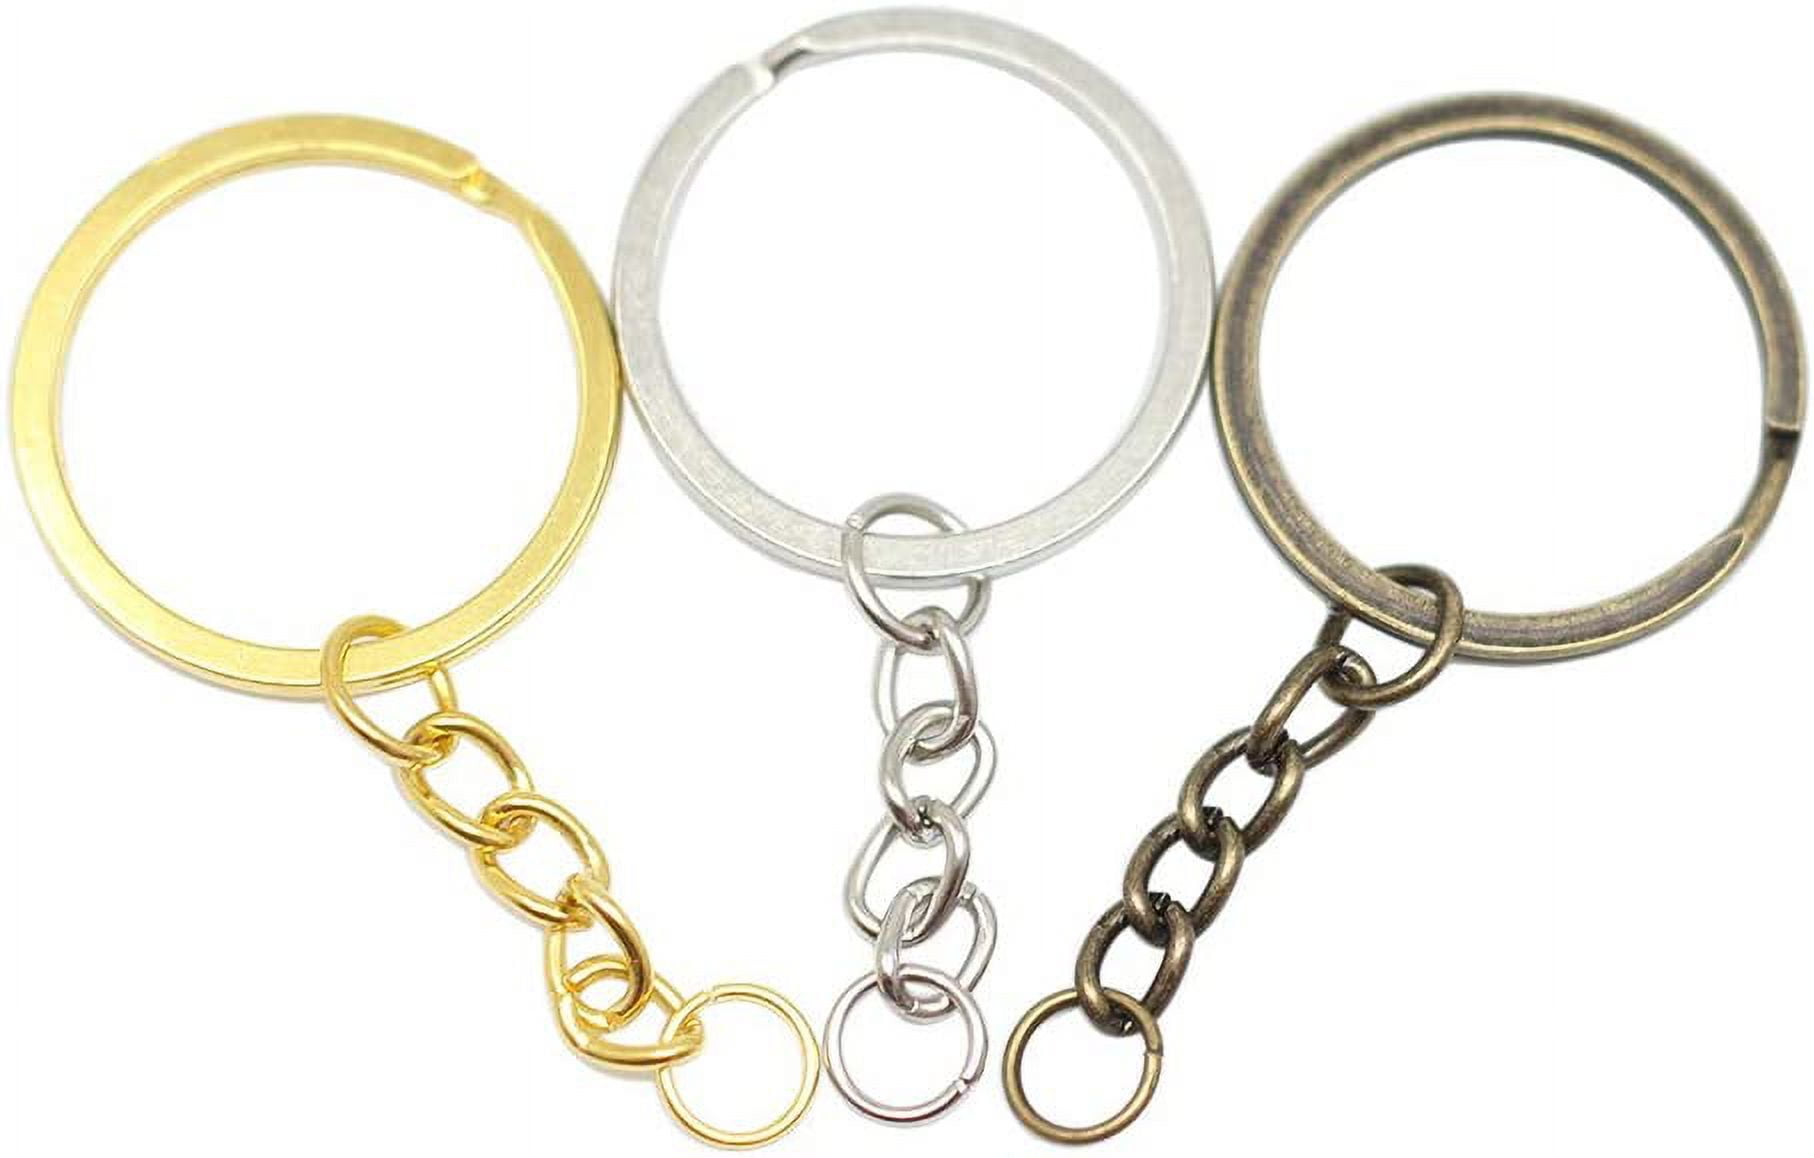  QWORK Key Ring, Set of 20, 2 Inch Large Open Key Ring - Sturdy  Key Chain Ring for Keychain and Crafts : Clothing, Shoes & Jewelry